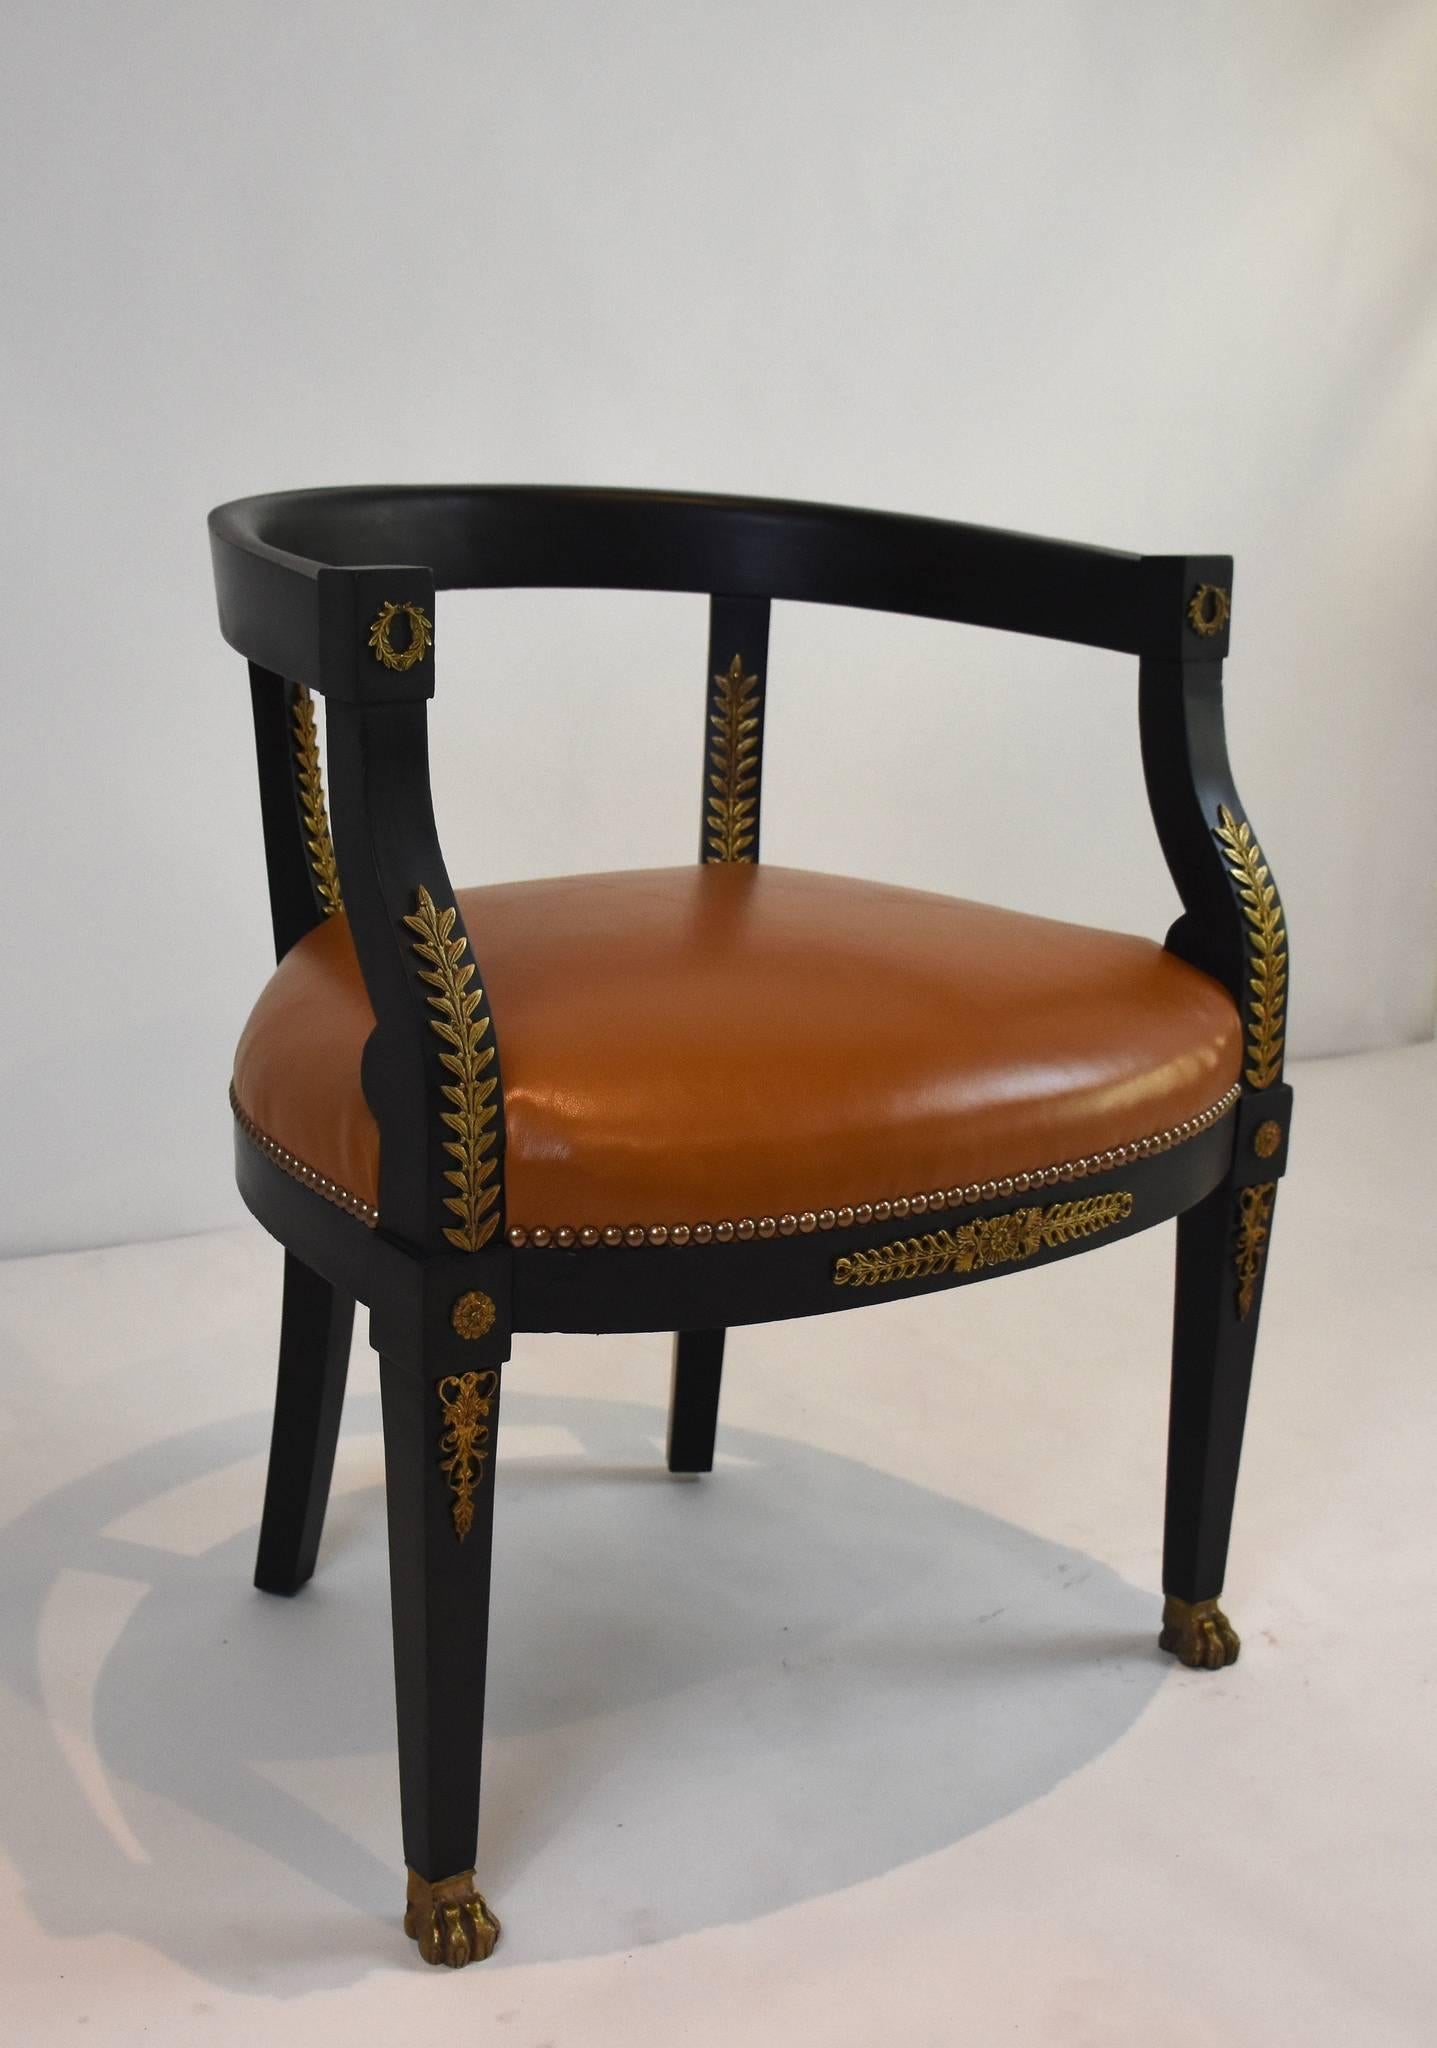 A 19th century Empire Revival black barrel back fauteuil with bronze ormolu and nailhead detail. This chair has been newly upholstered in a cognac goatskin leather and eight-way hand tied springs.